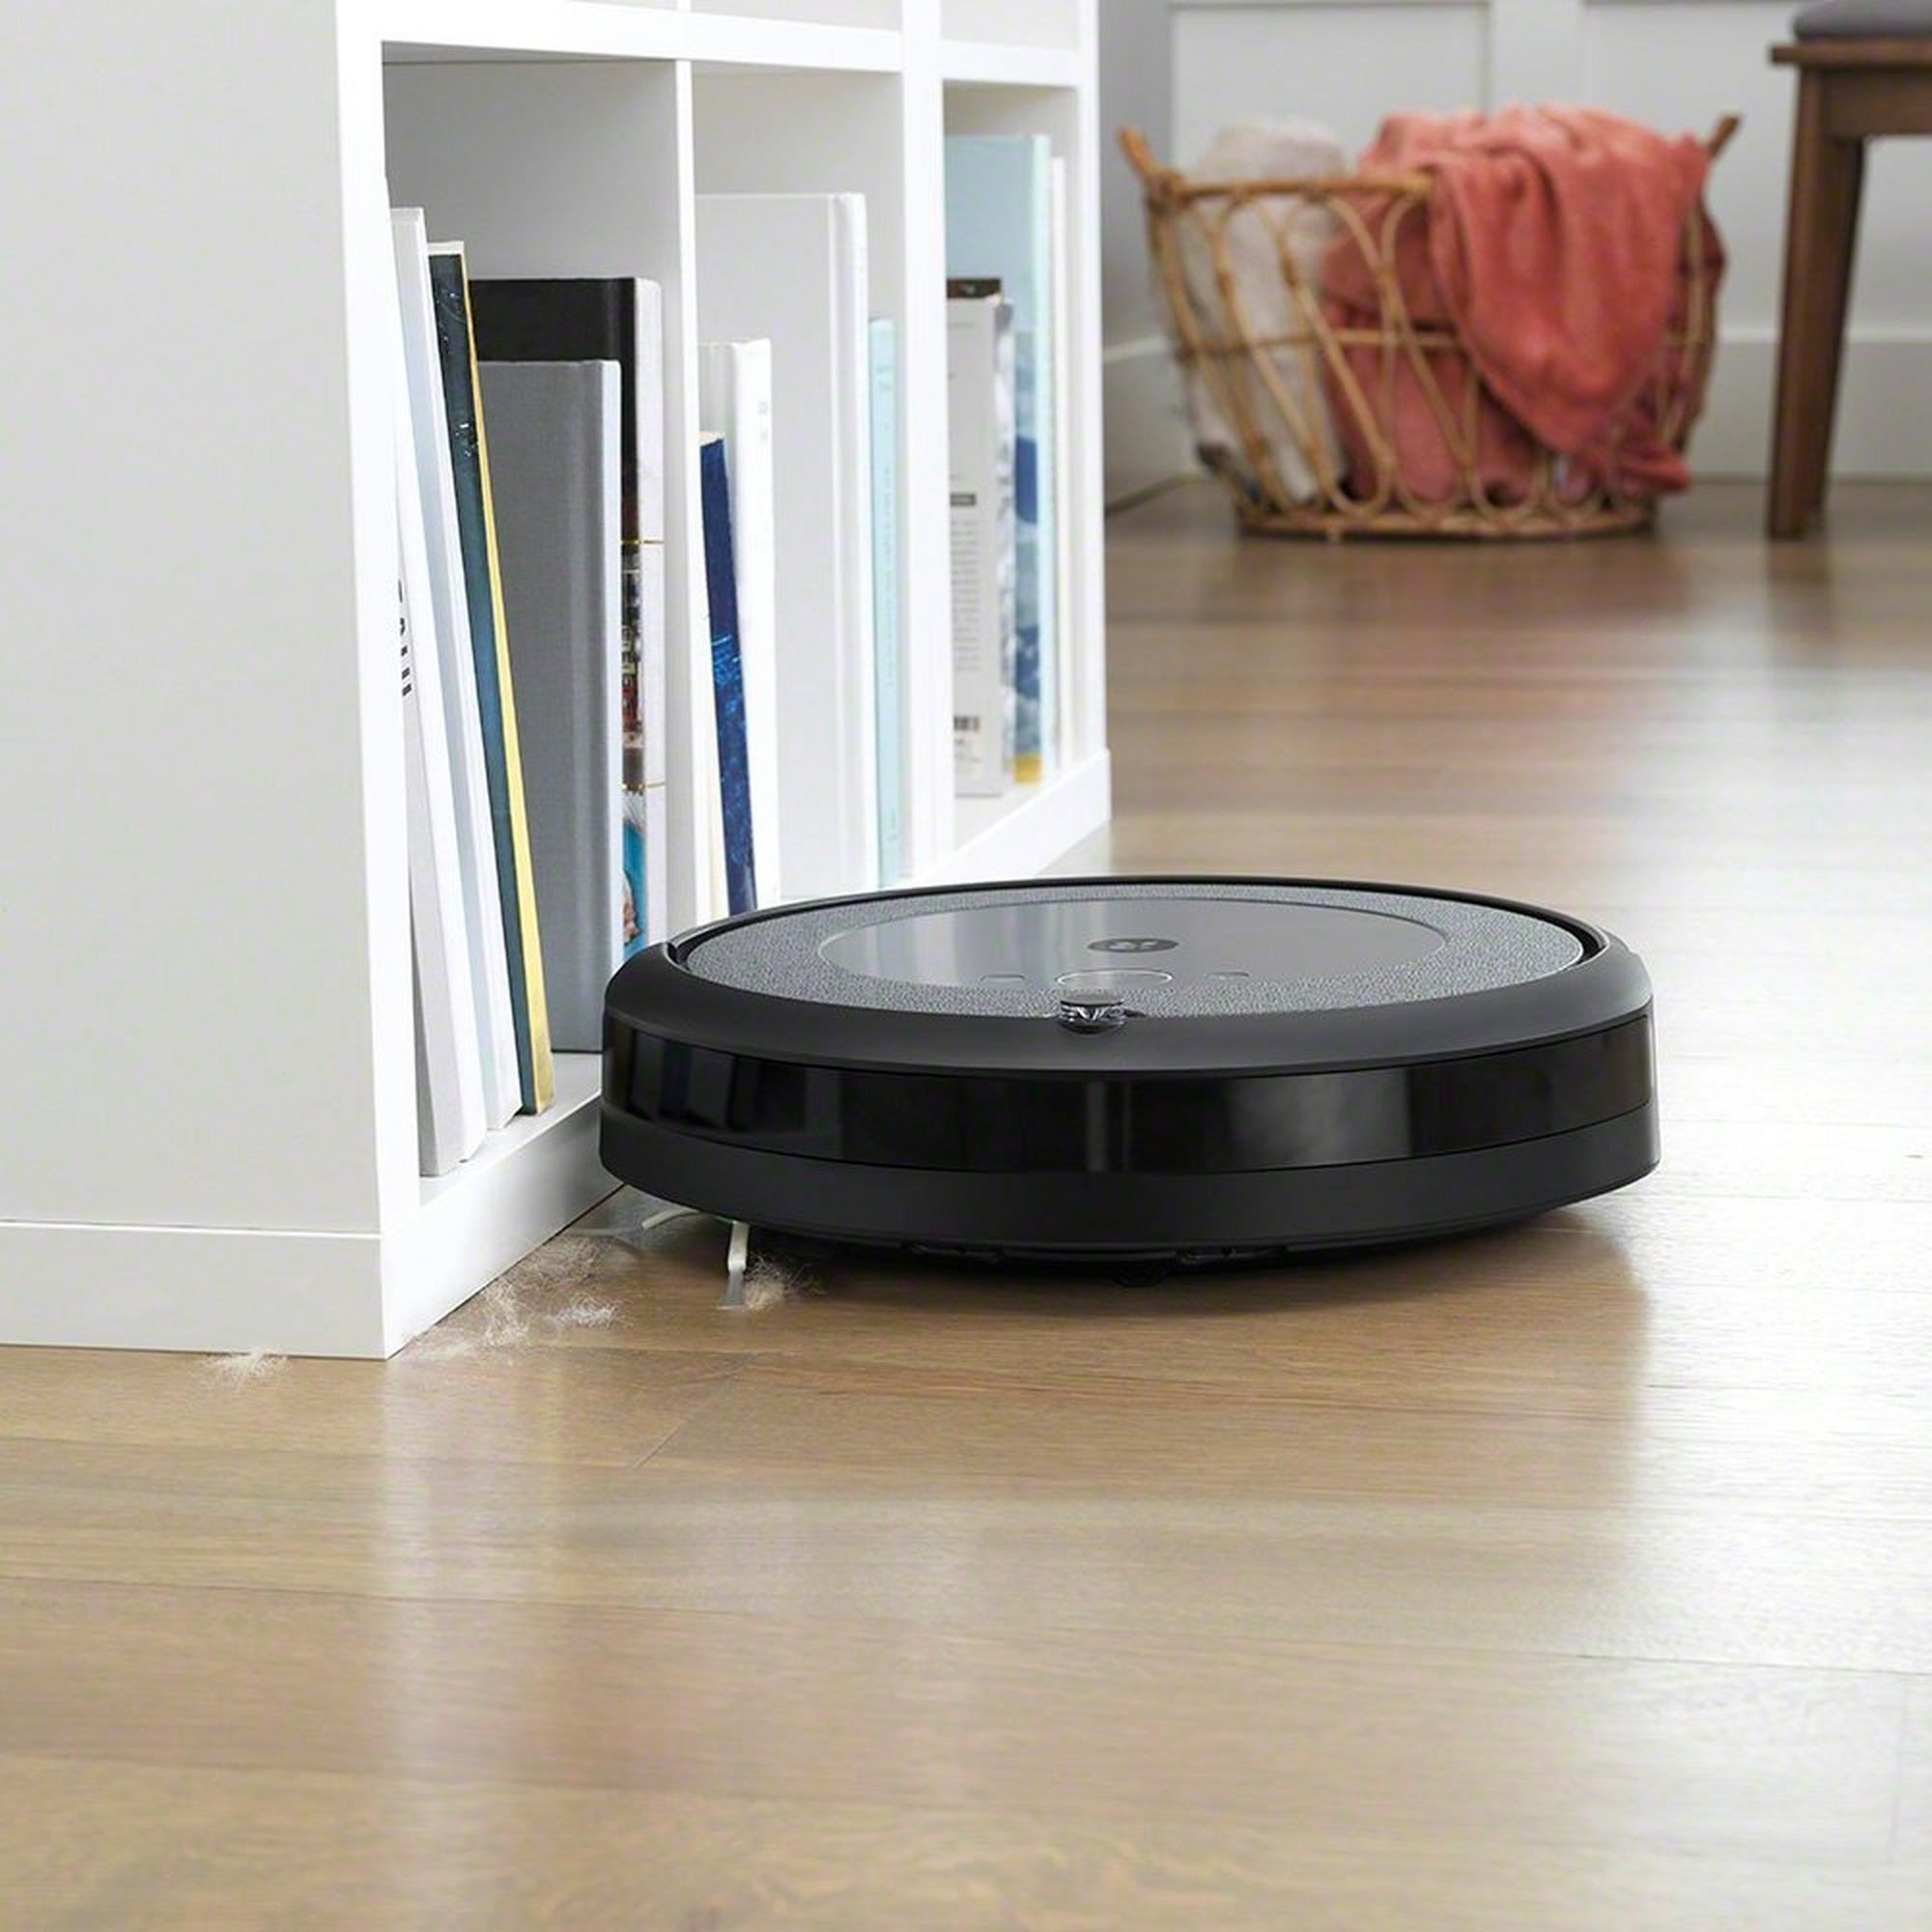 iRobot update new to Roomba and devices, doubling the intelligence of some models - NotebookCheck.net News